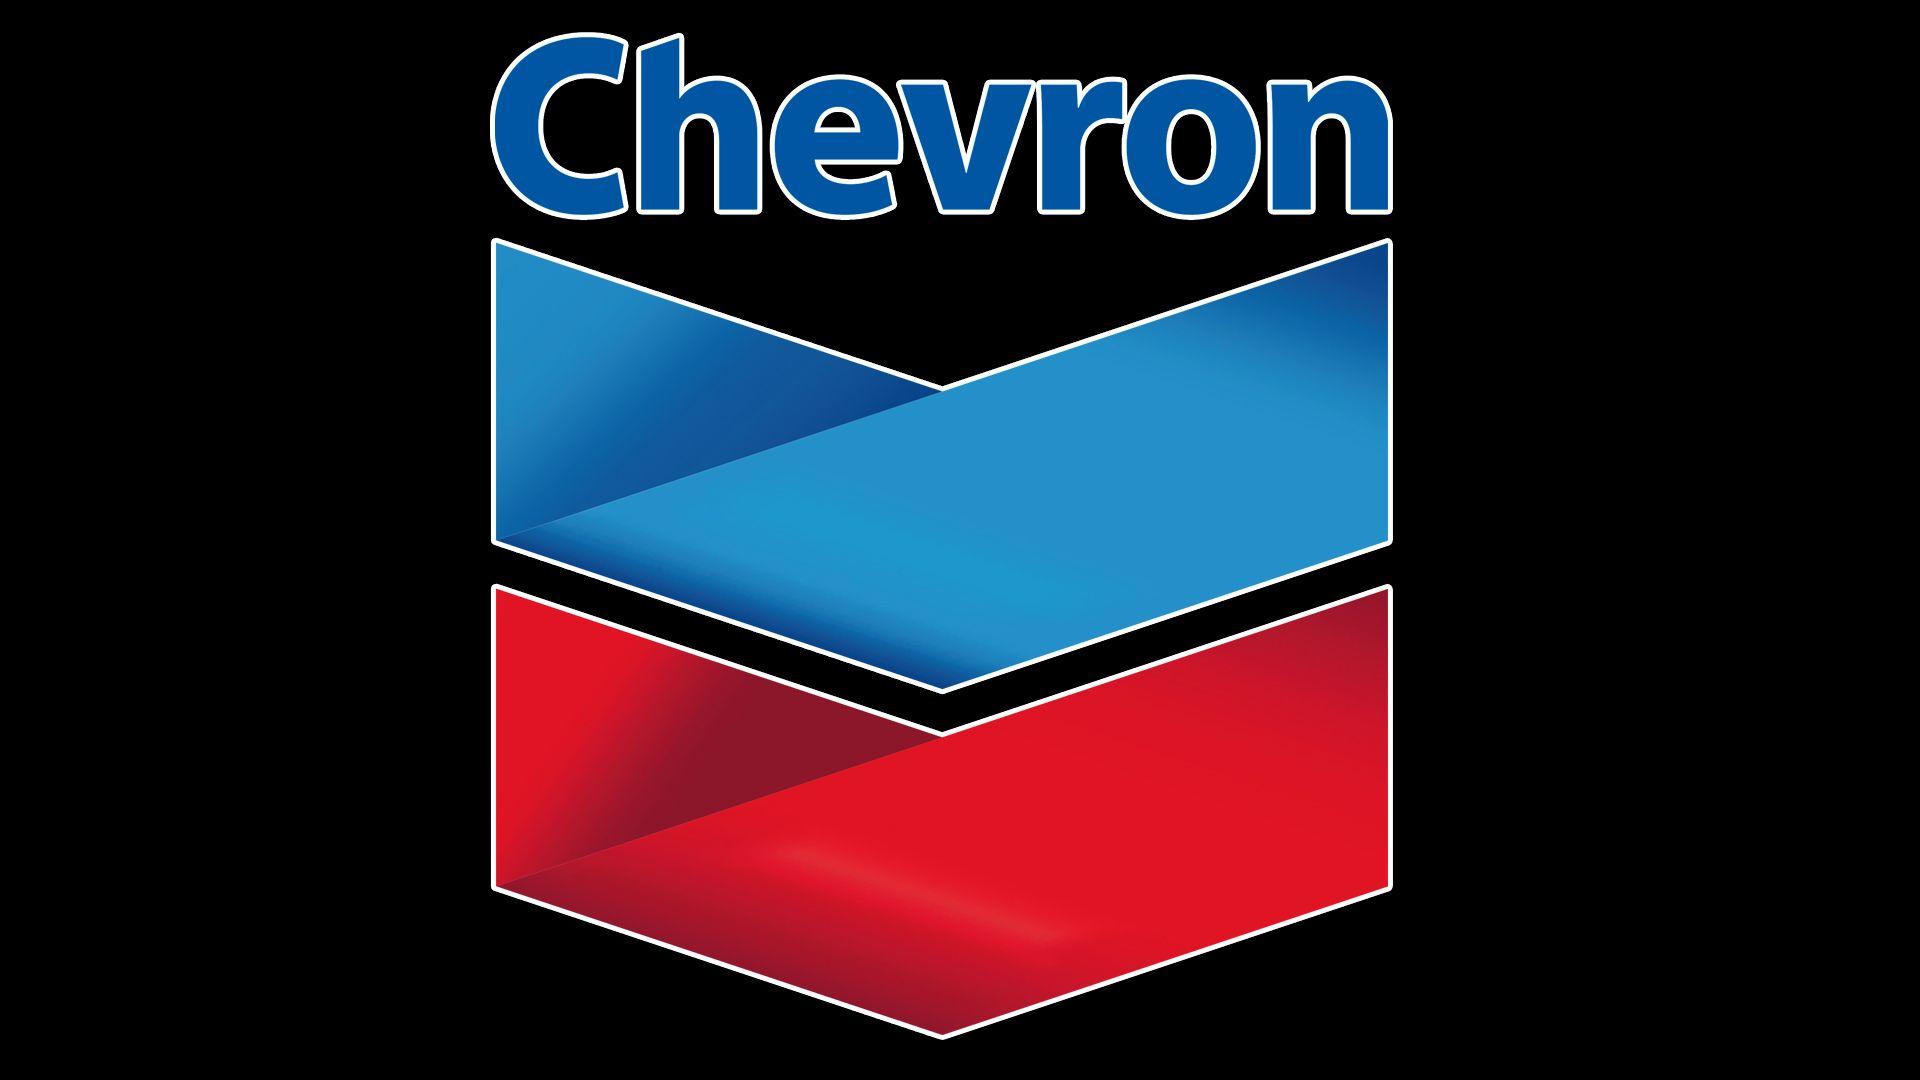 Chevron Logo - Chevron Logo, Chevron Symbol, Meaning, History and Evolution